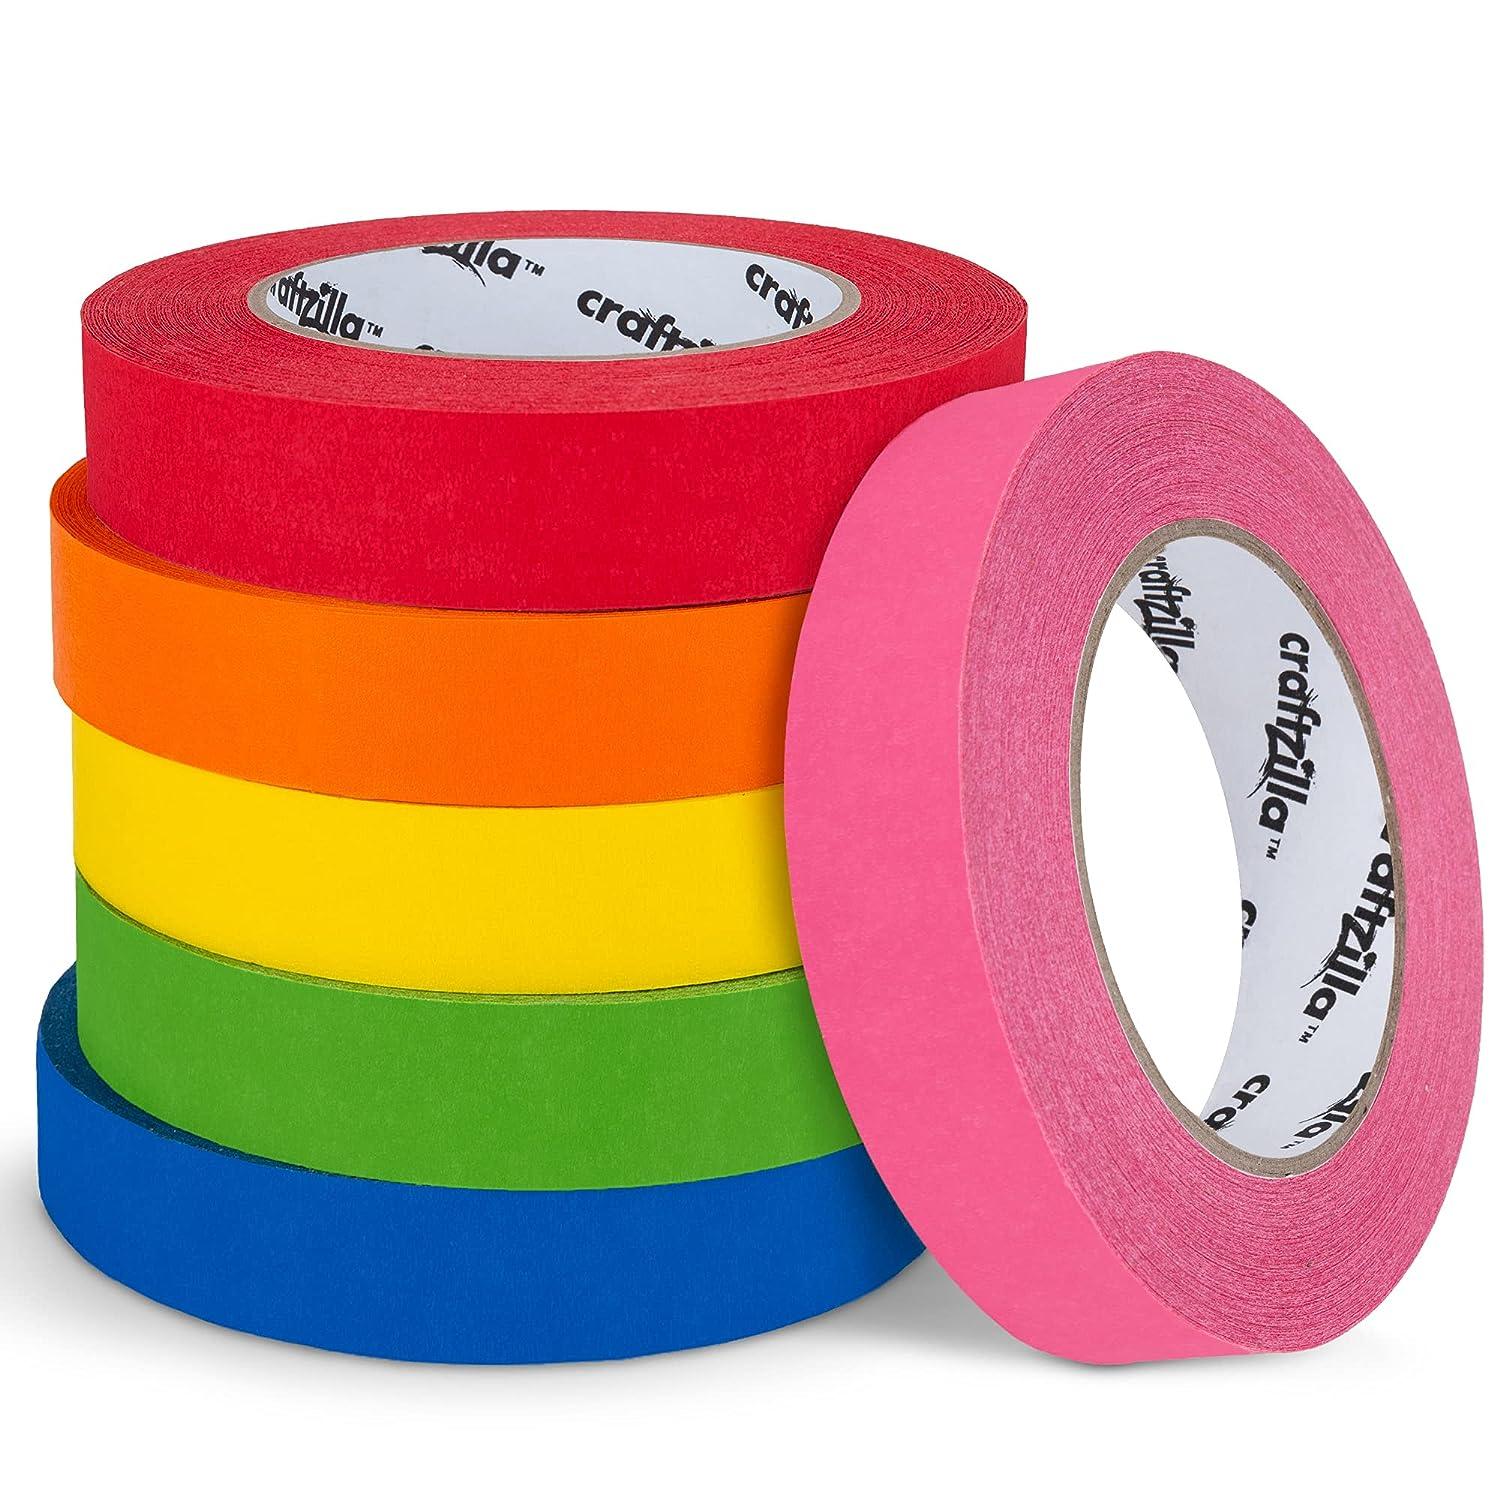 New-colored Masking Tape,colored Painters Tape For Arts And Crafts